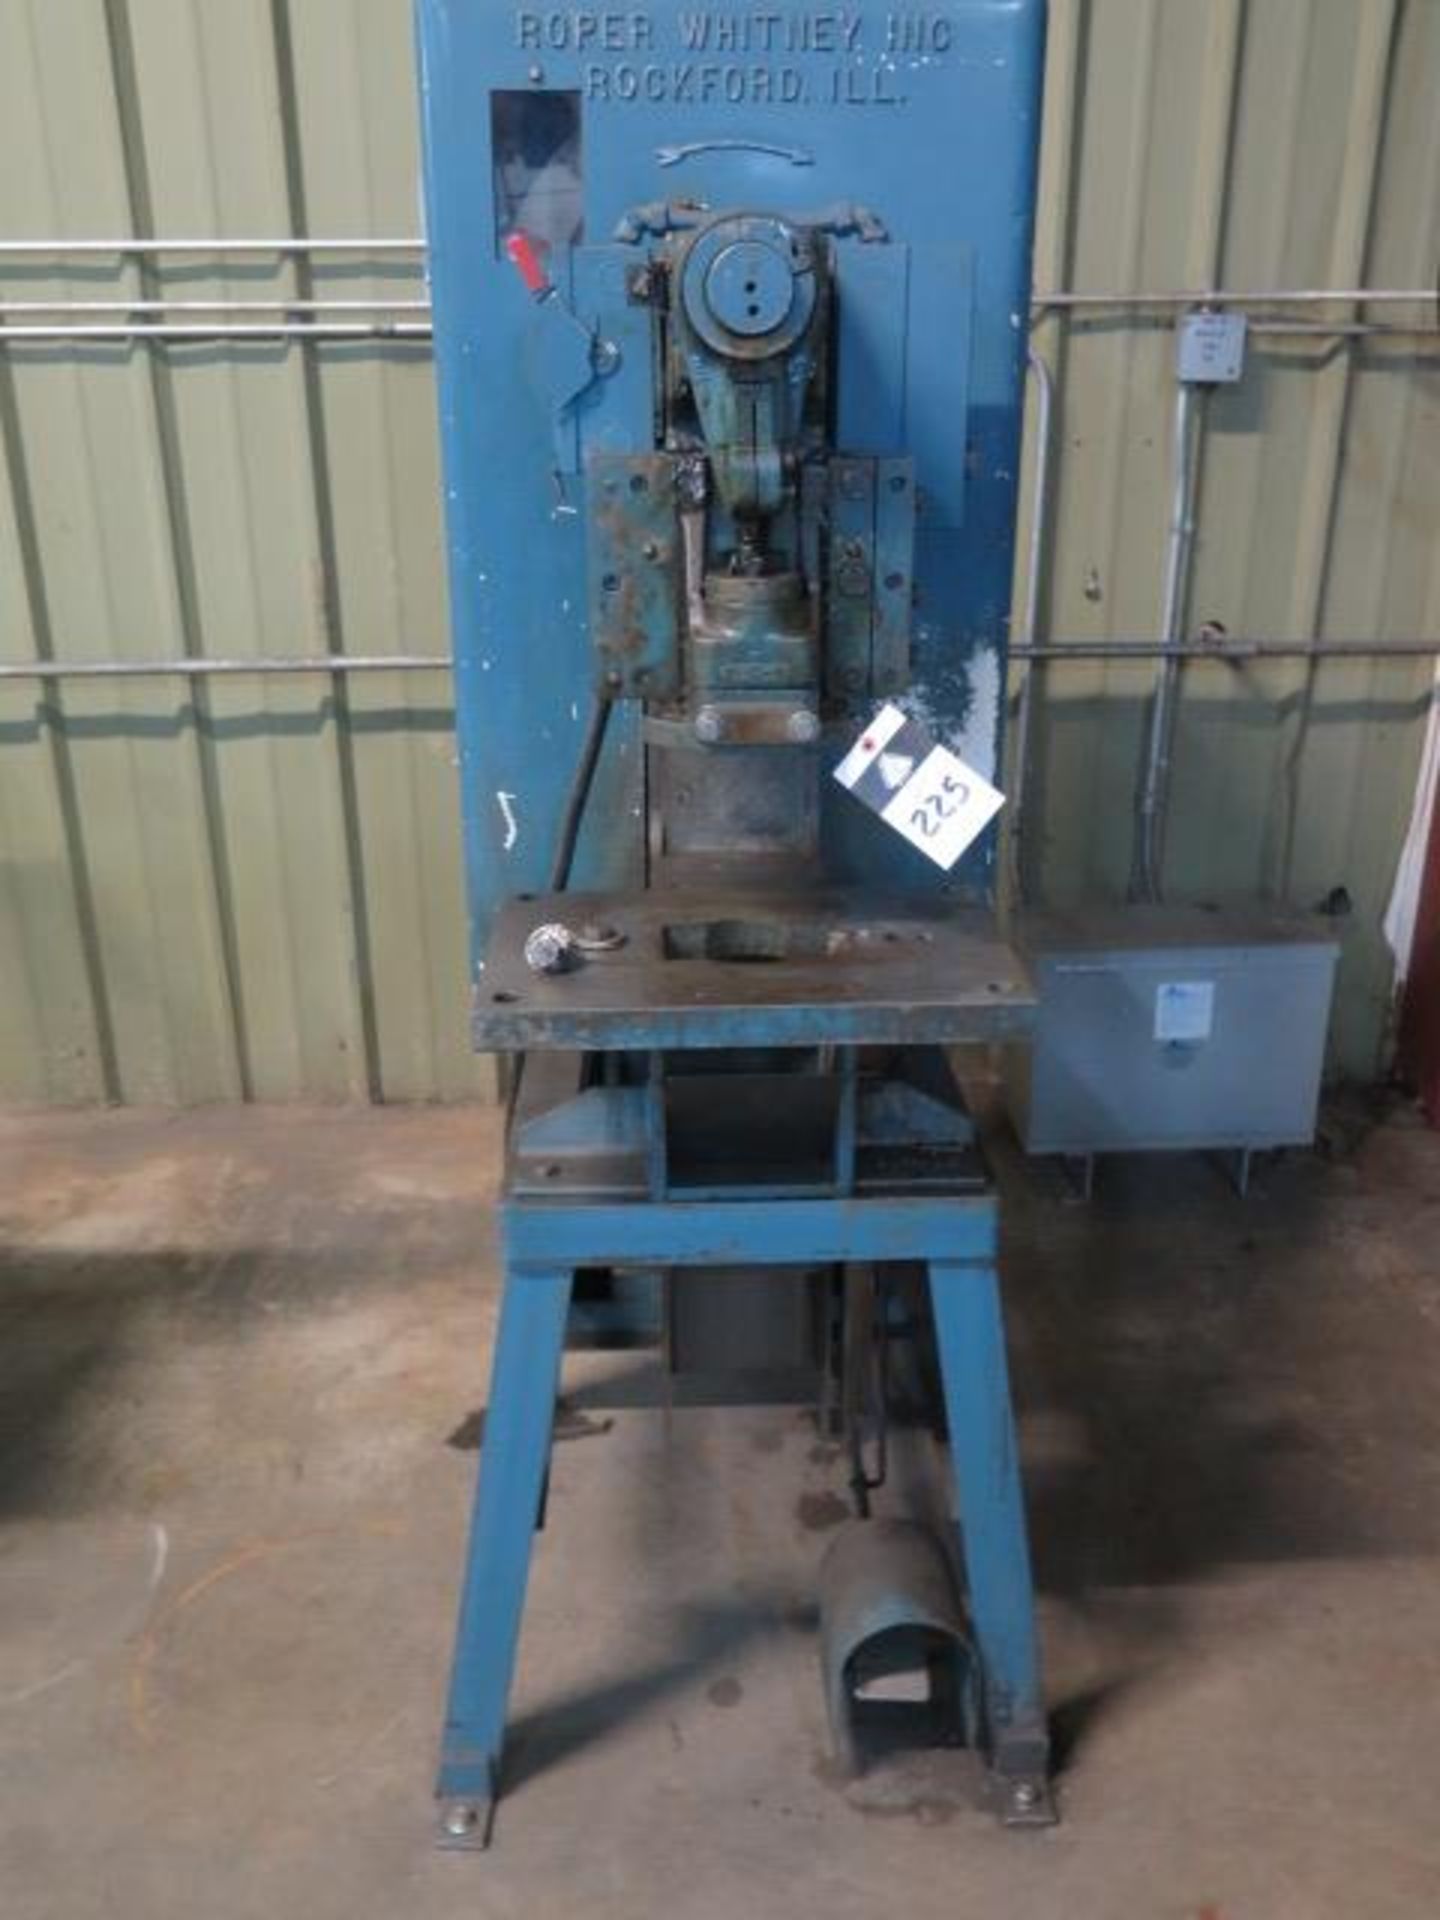 Roper Whitney mdl. 129 10-Ton Stamping Press s/n 1186-4-86 w/ 12" x 18" Bolster Area SOLD AS-IS